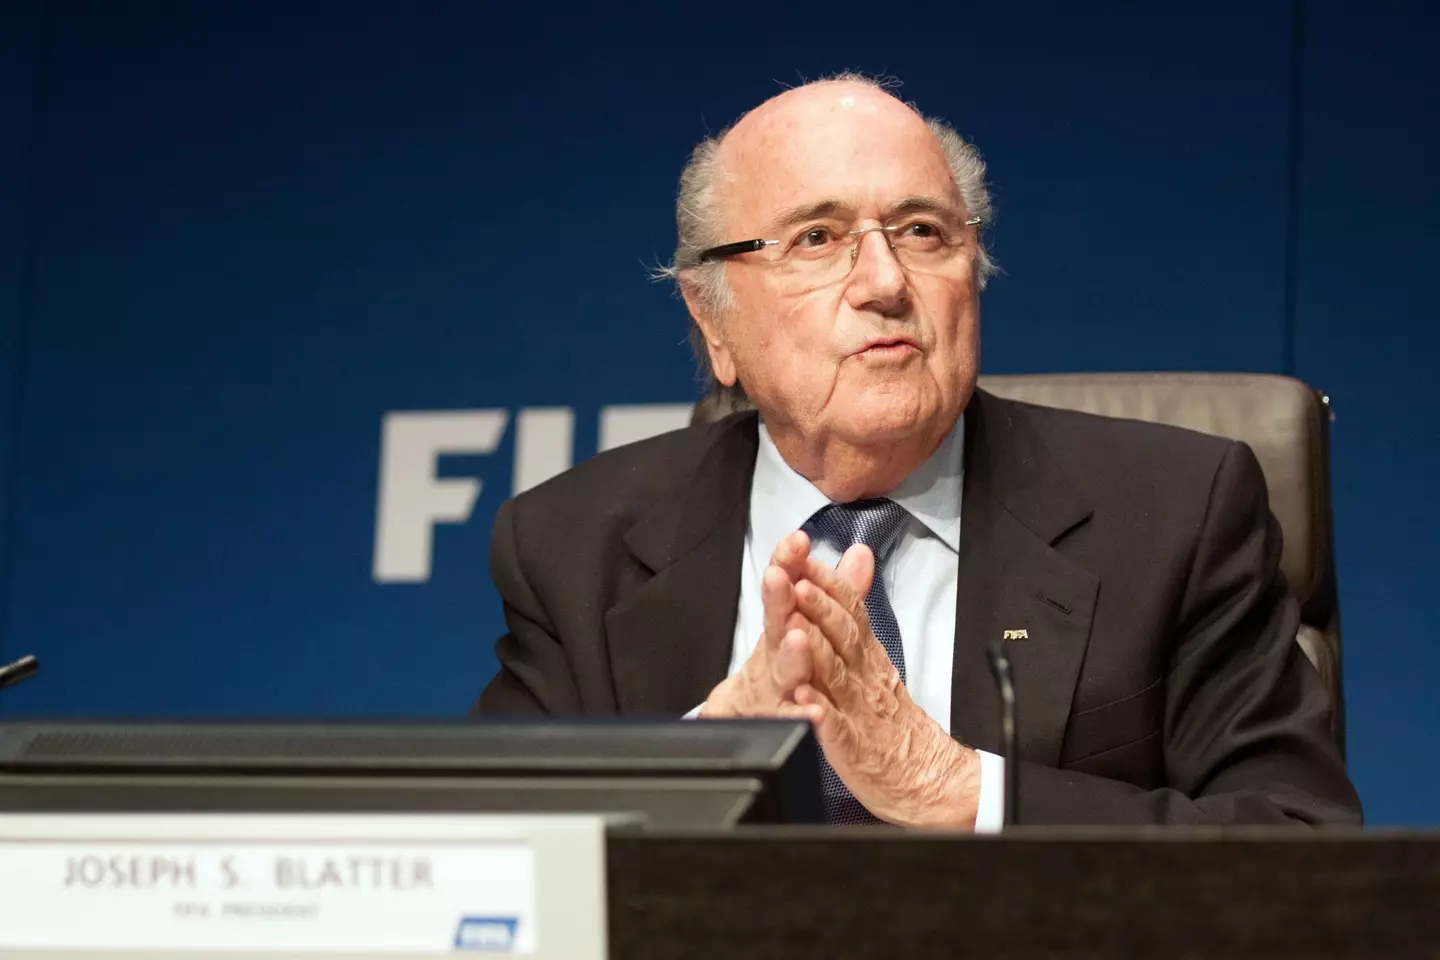 Sepp Blatter admitted Qatar should not have been awarded the 2022 World Cup.